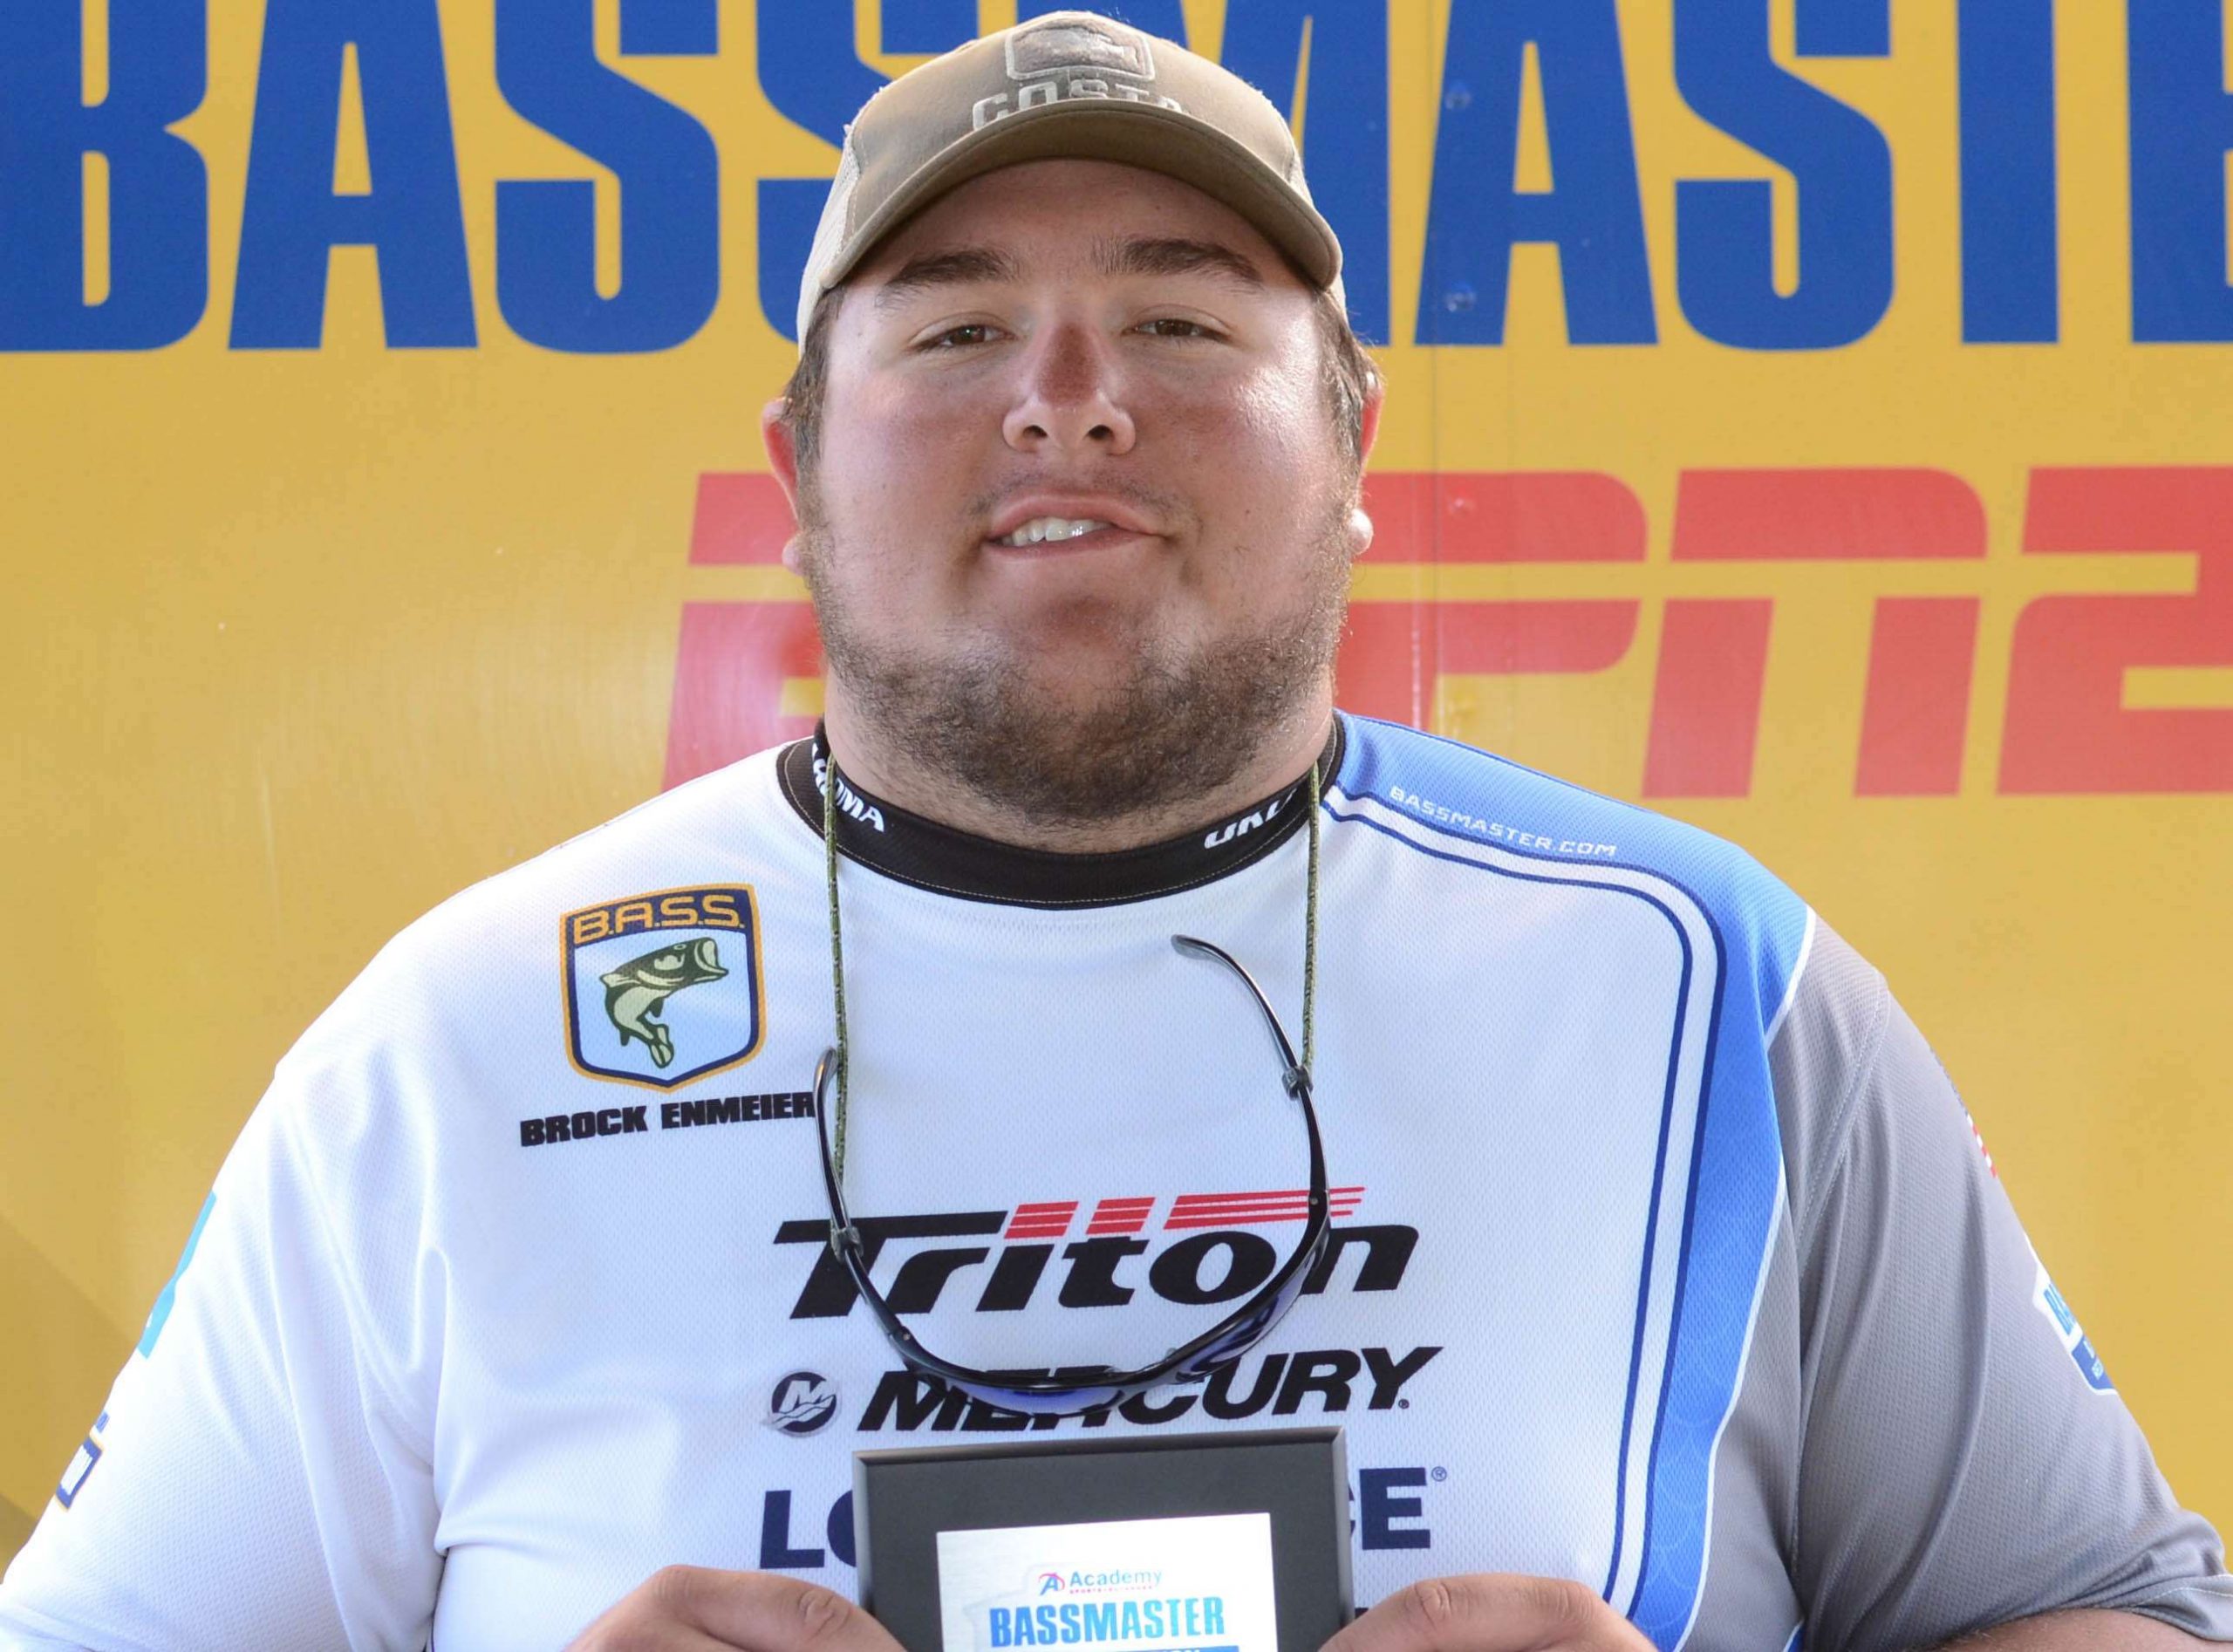 Brock Enmeier <br>
Oklahoma Nonboater <br>
Brock Enmeier of Enid Bass Club works as a manager at Shoreline Boat & RV Repair. This is his first championship. Heâs sponsored by Zee Bait Co., Shoreline Boat & RV Repair and Dixie Fowl Co. Enmeier likes hunting and golf. 